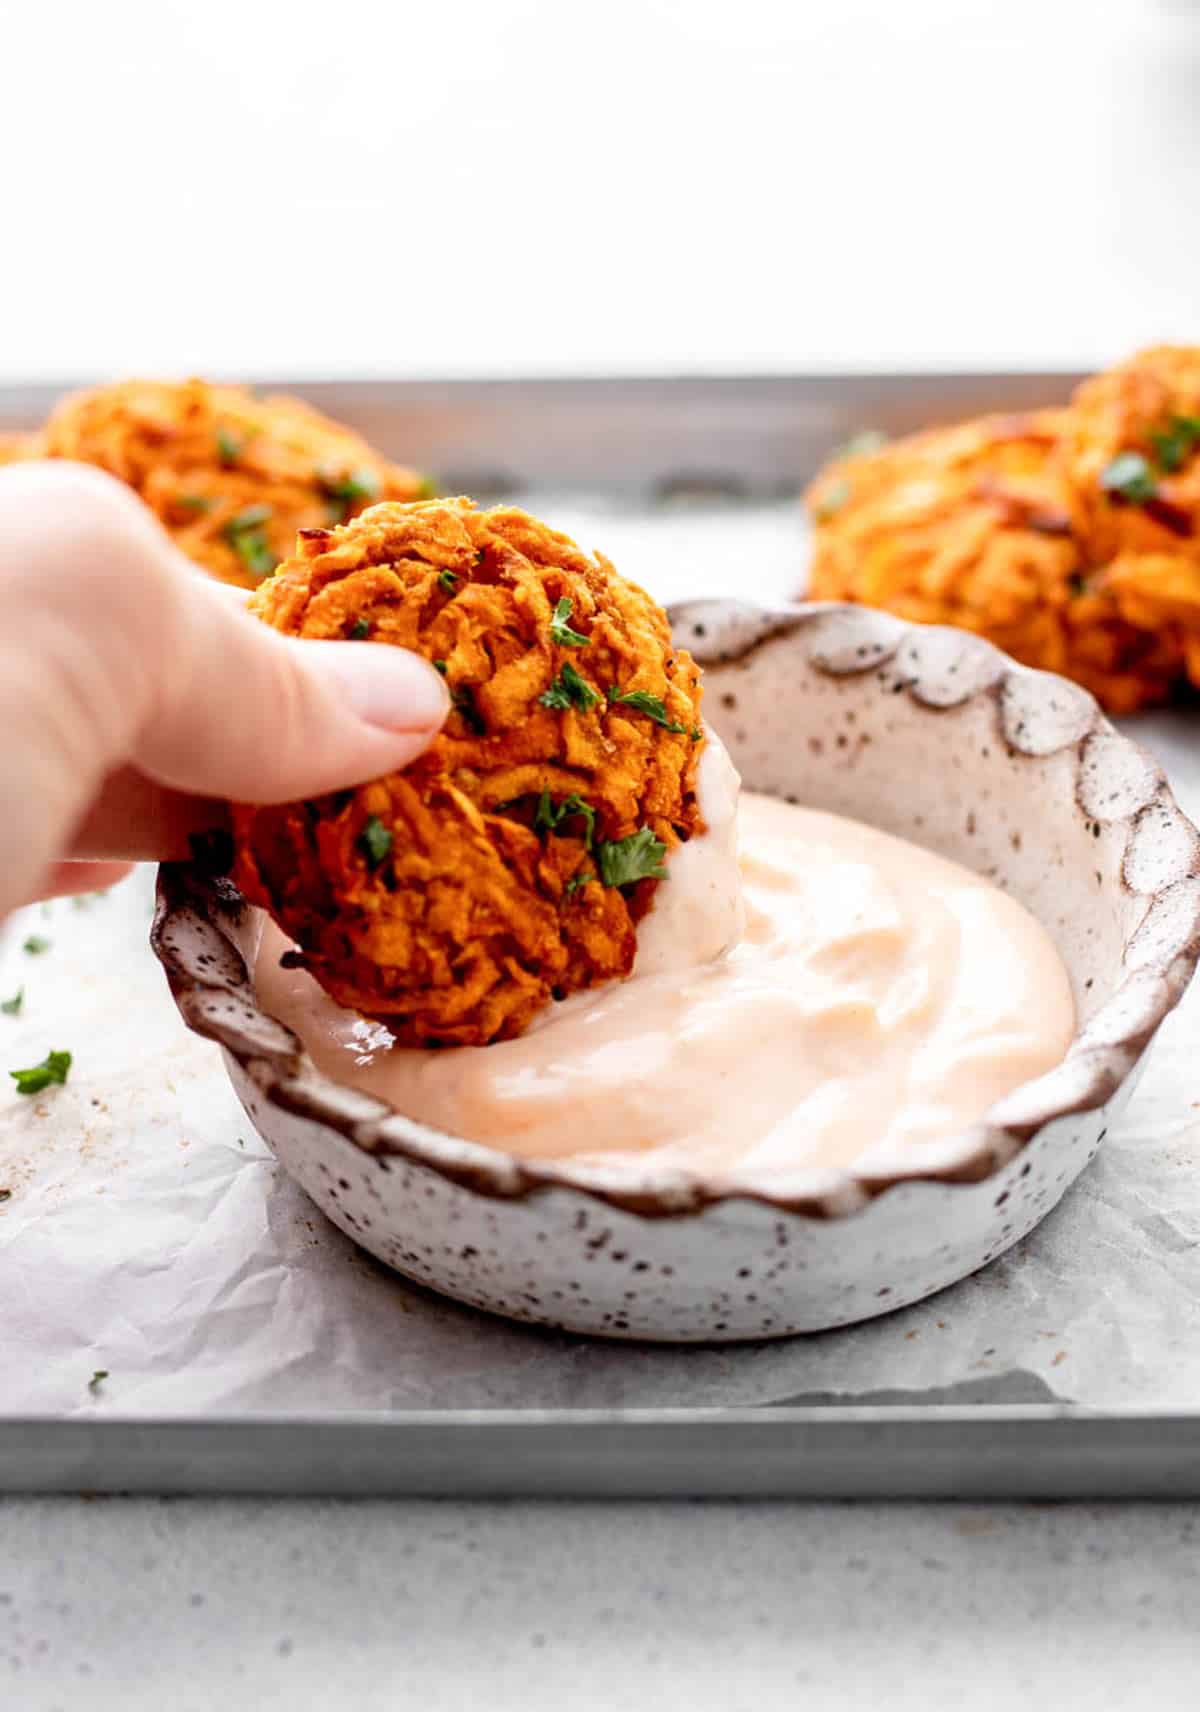 A baked sweet potato fritter being dipped into a bowl of creamy sauce.